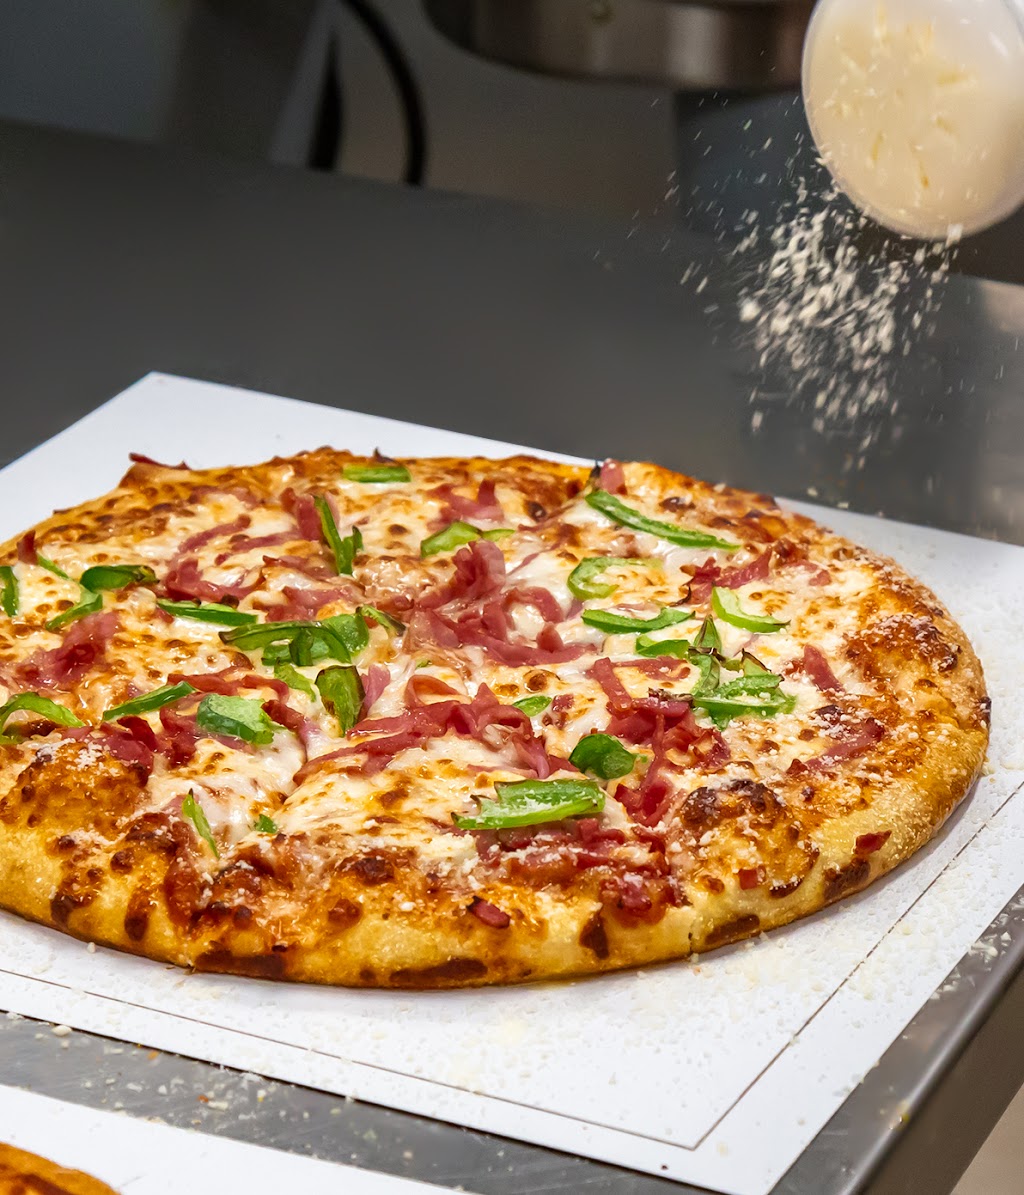 Hungry Howies Pizza | 9173 Mentor Ave Unit 2, Mentor, OH 44060, USA | Phone: (440) 205-9595